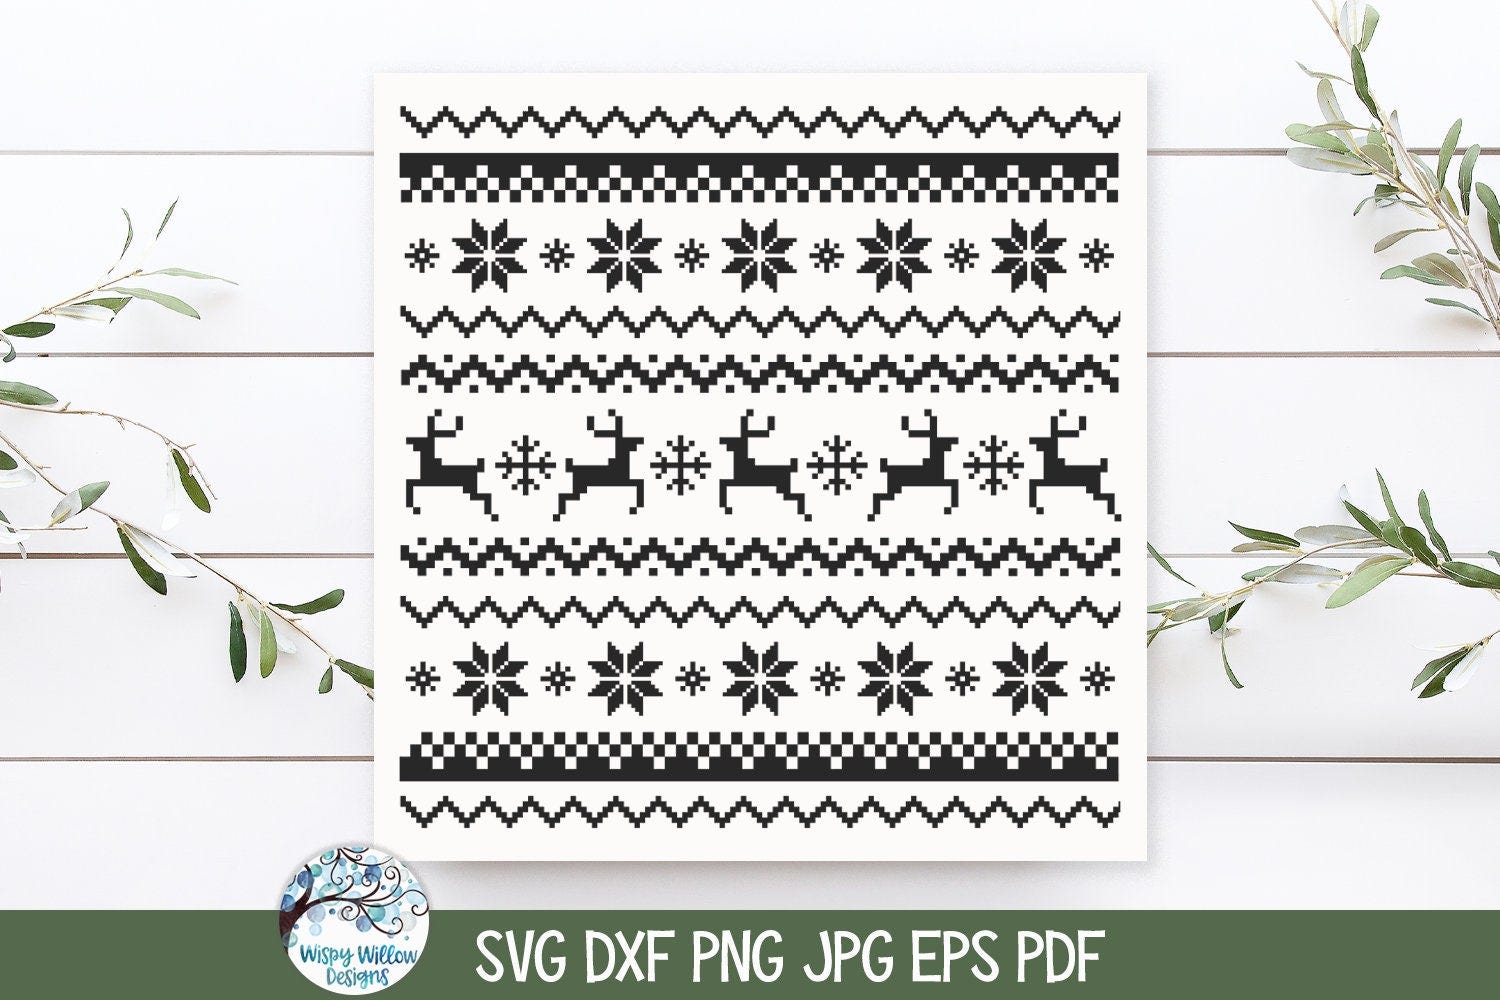 Christmas Sweater Pattern for Cricut, Ugly Sweater Knit Pattern, Christmas Shirt PNG, Winter Sweater Design, Vinyl Decal Cut File Download